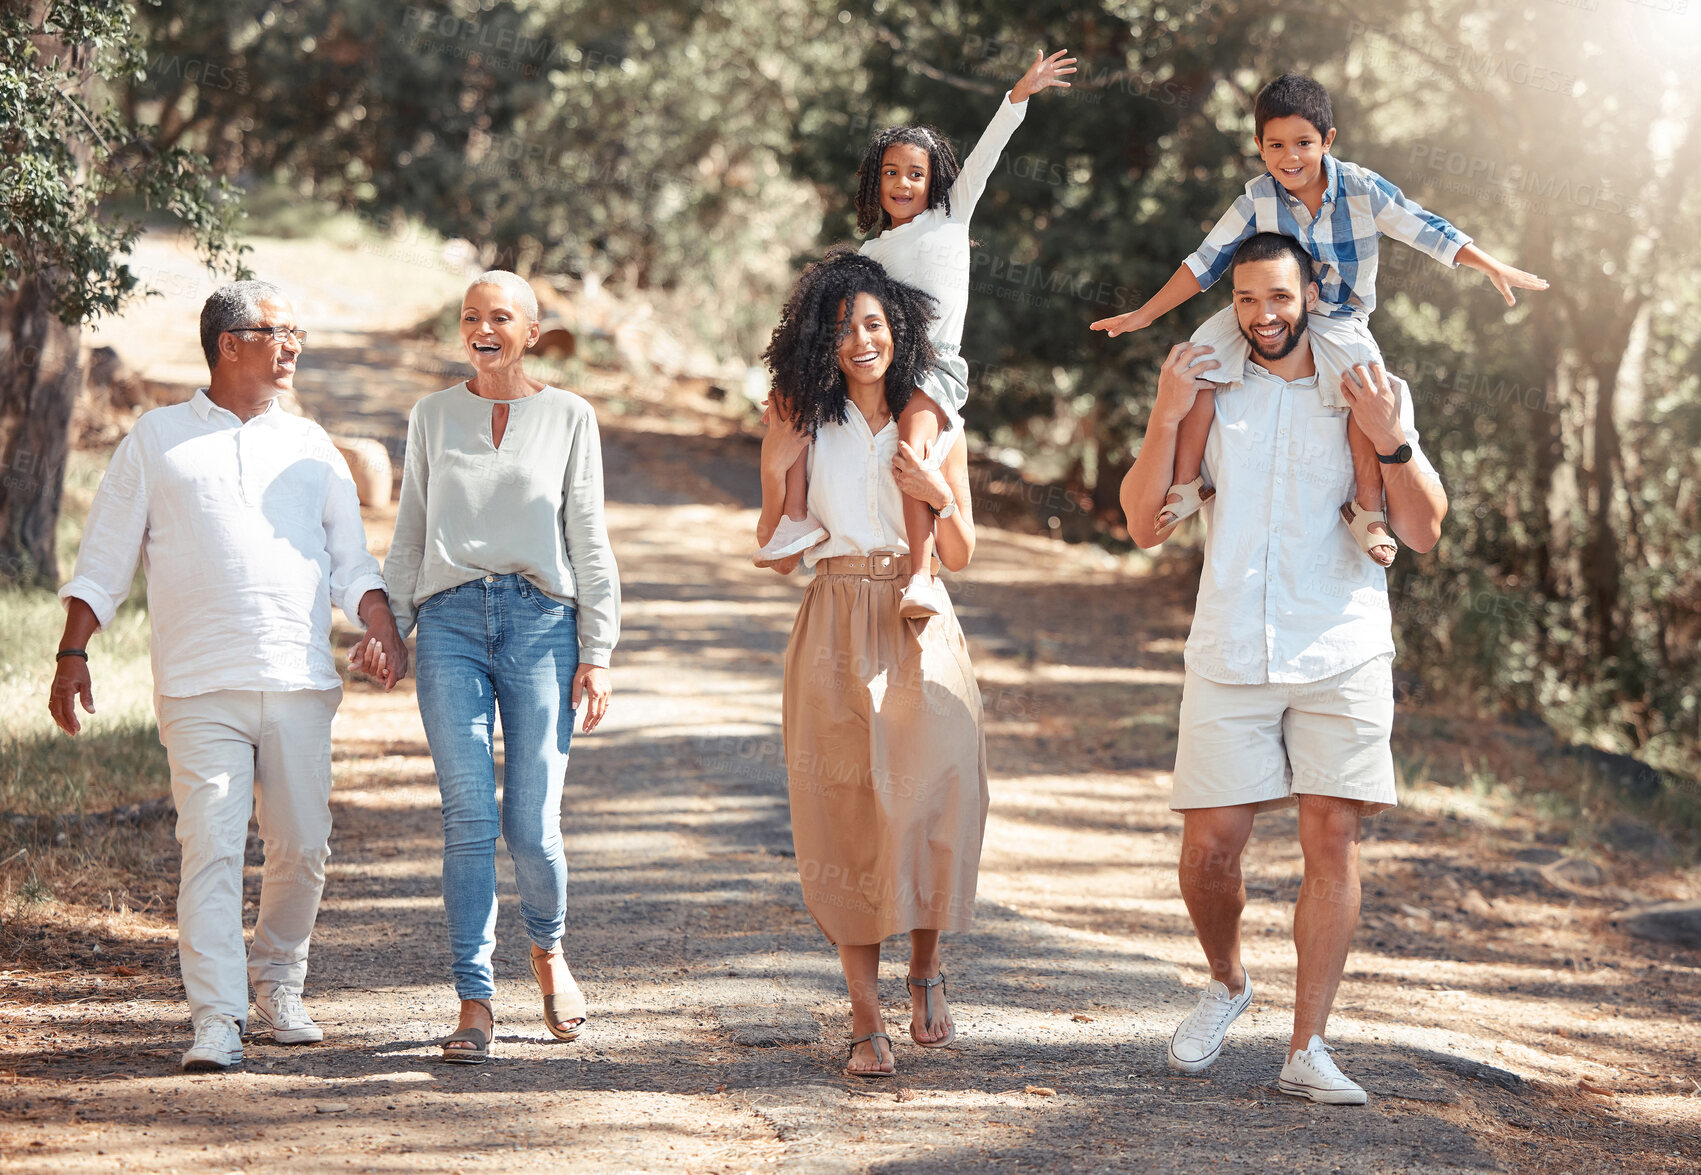 Buy stock photo Happy family, fun and freedom with laughing kids and playful grandparents bonding on a walk in a nature. Love, cheerful and relax with playful family enjoying an active walk in park, peaceful cardio